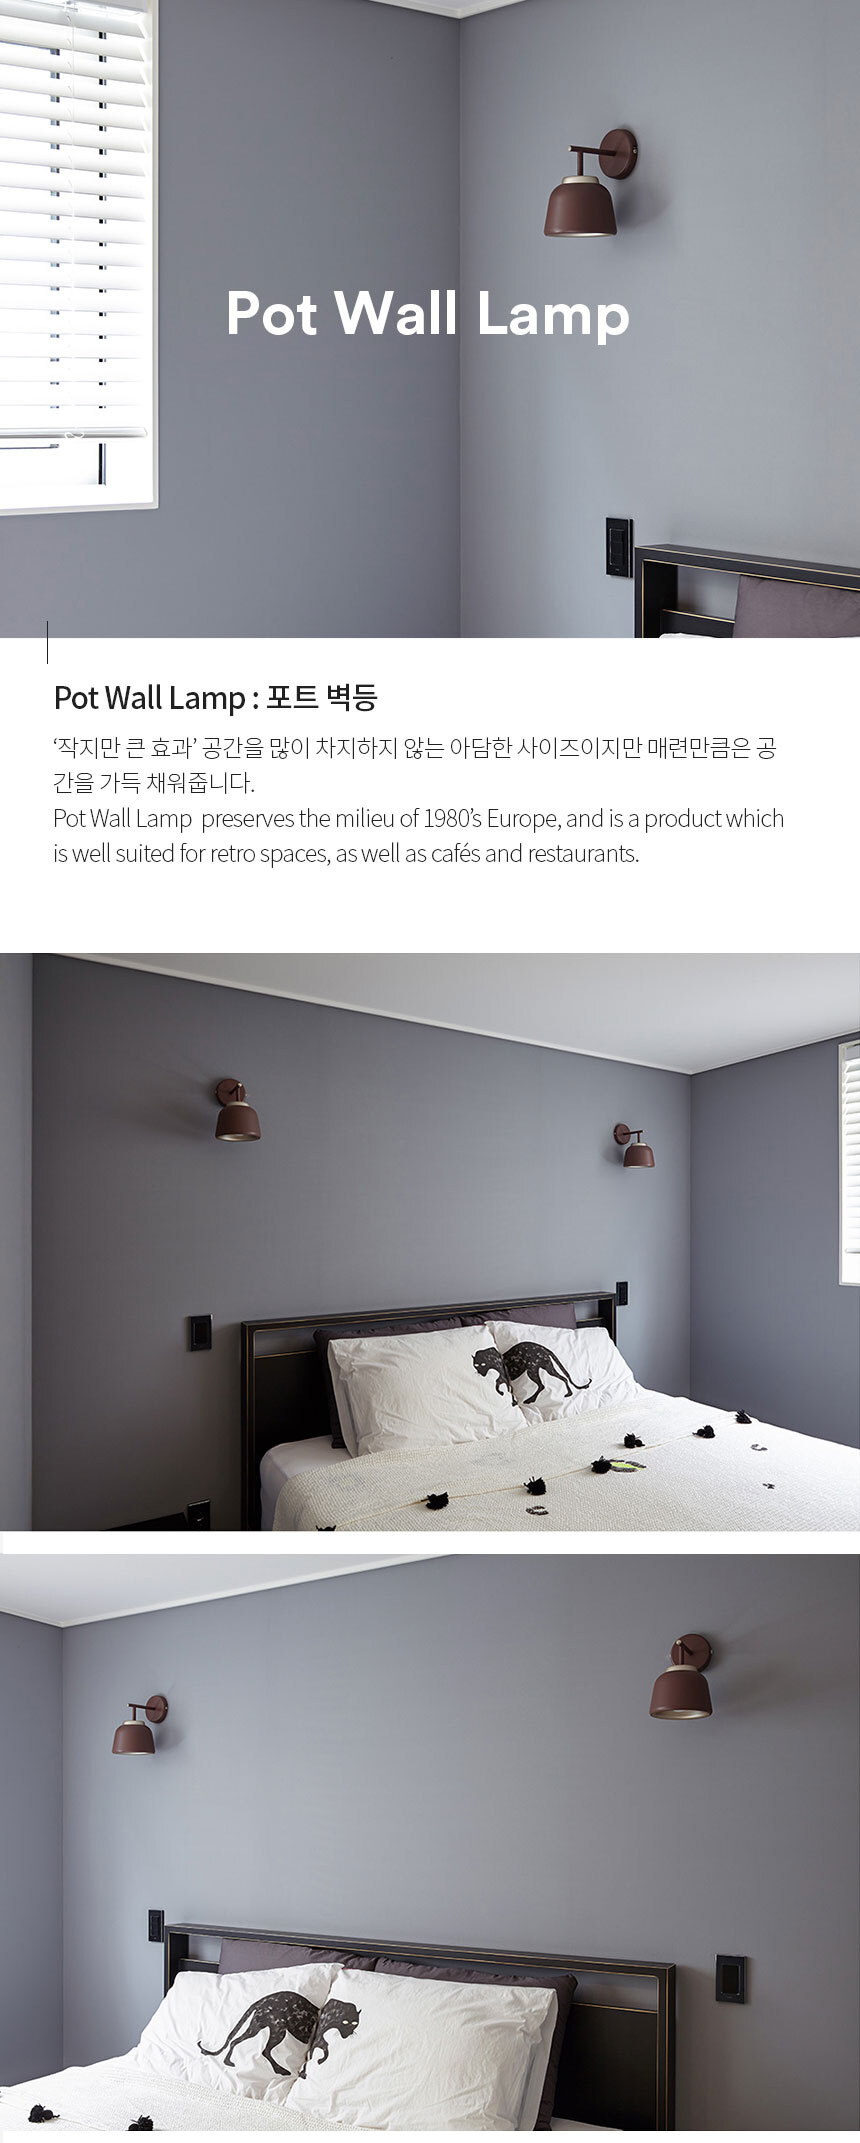 Pot Wall Lamp : 포트 벽등 ‘작지만 큰 효과’ 공간을 많이 차지하지 않는 아담한 사이즈이지만 매련만큼은 공
간을 가득 채워줍니다.
Pot Wall Lamp  preserves the milieu of 1980’s Europe, and is a product which 
is well suited for retro spaces, as well as cafés and restaurants.